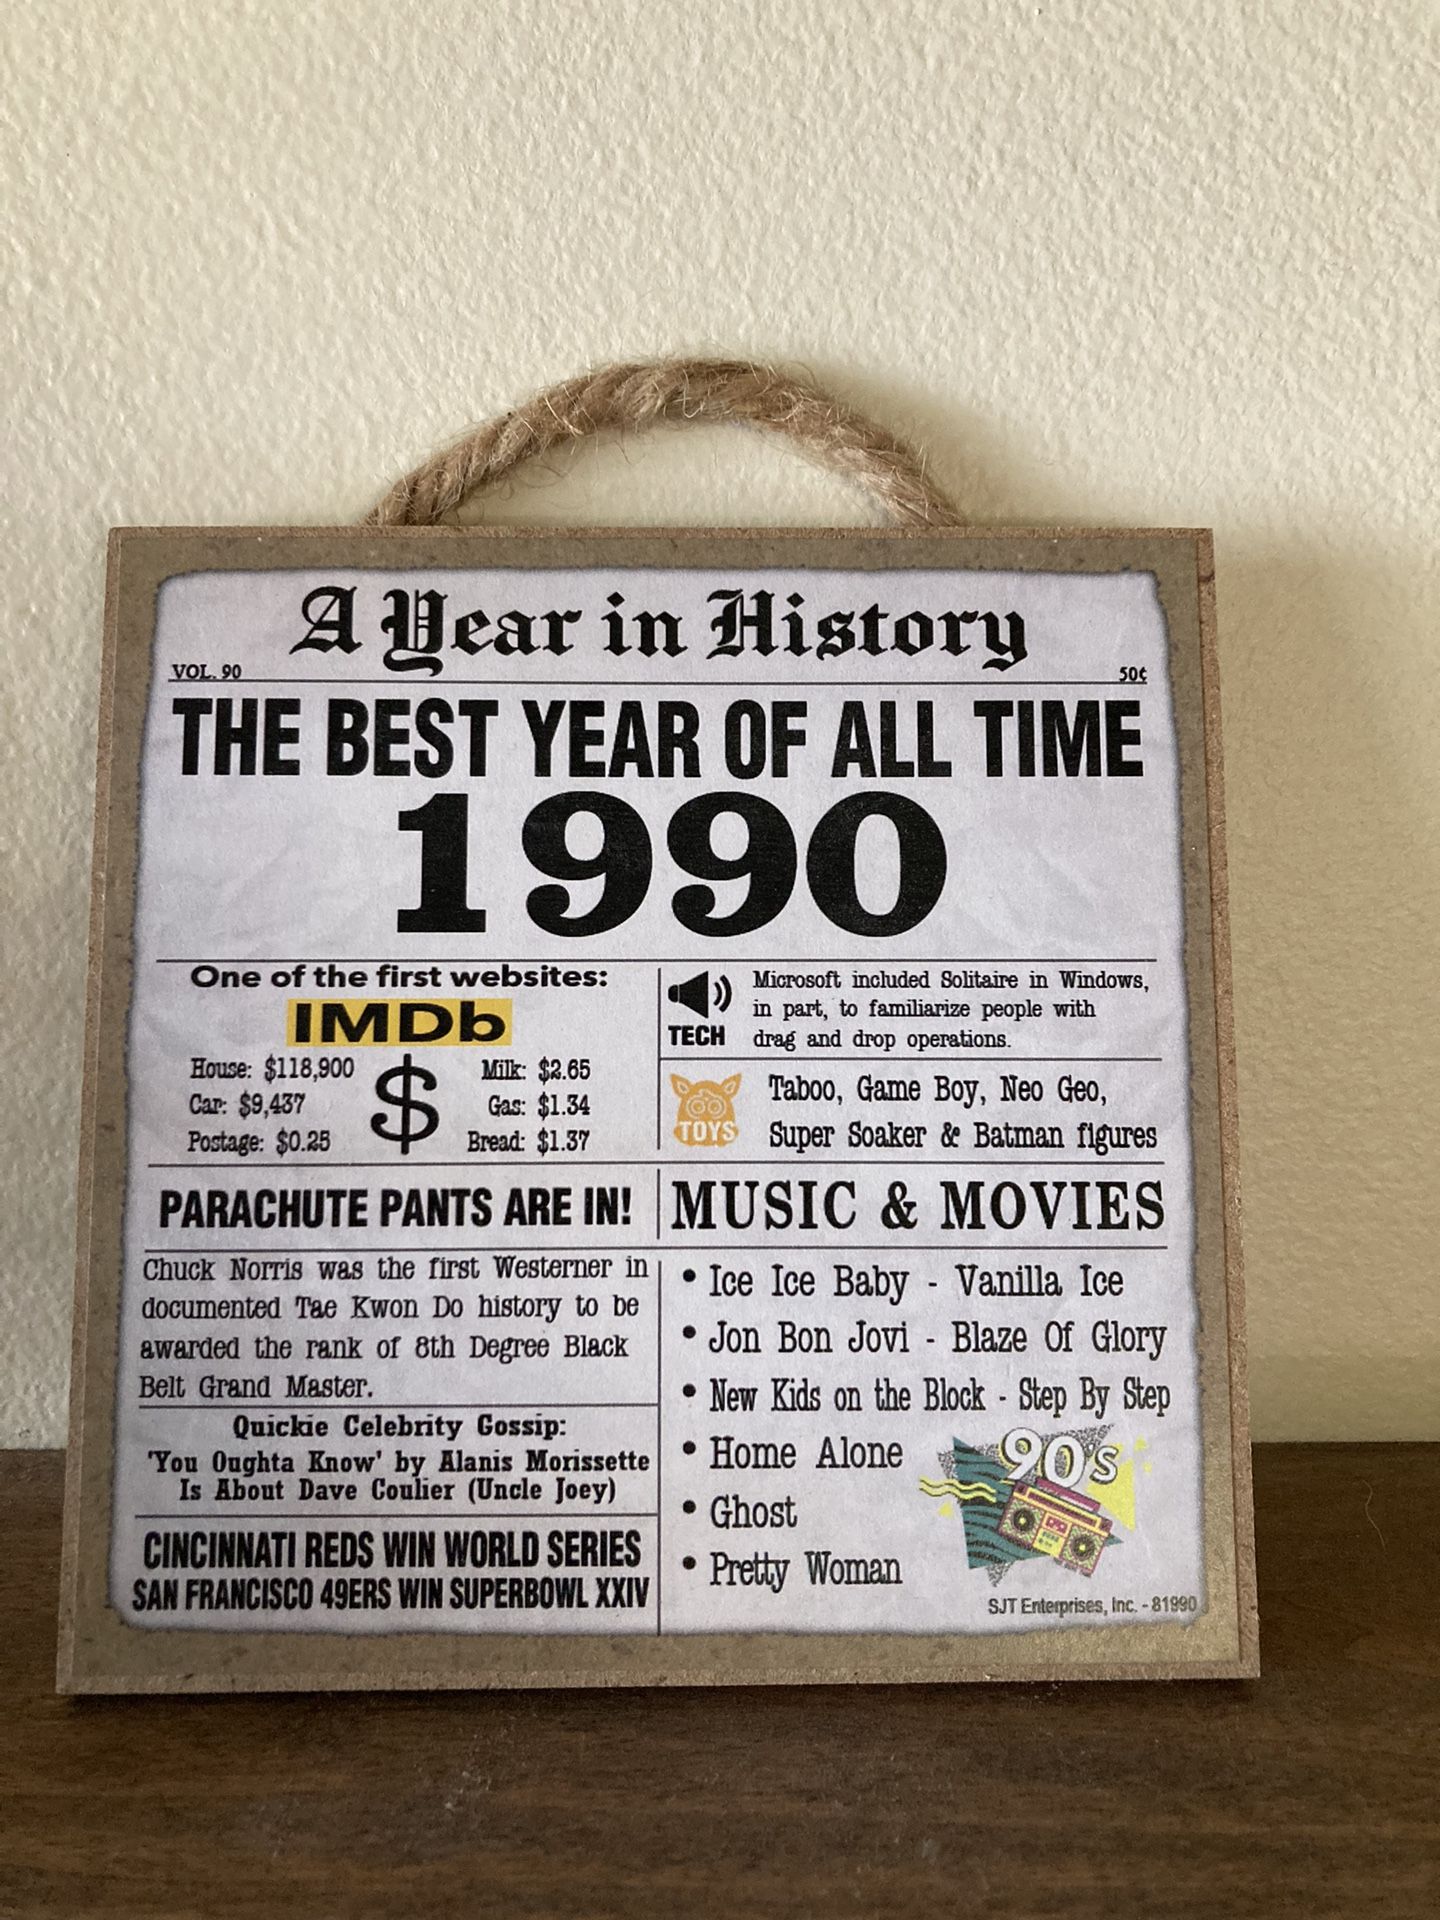 The Best Year Of All Time, 1990 Plaque